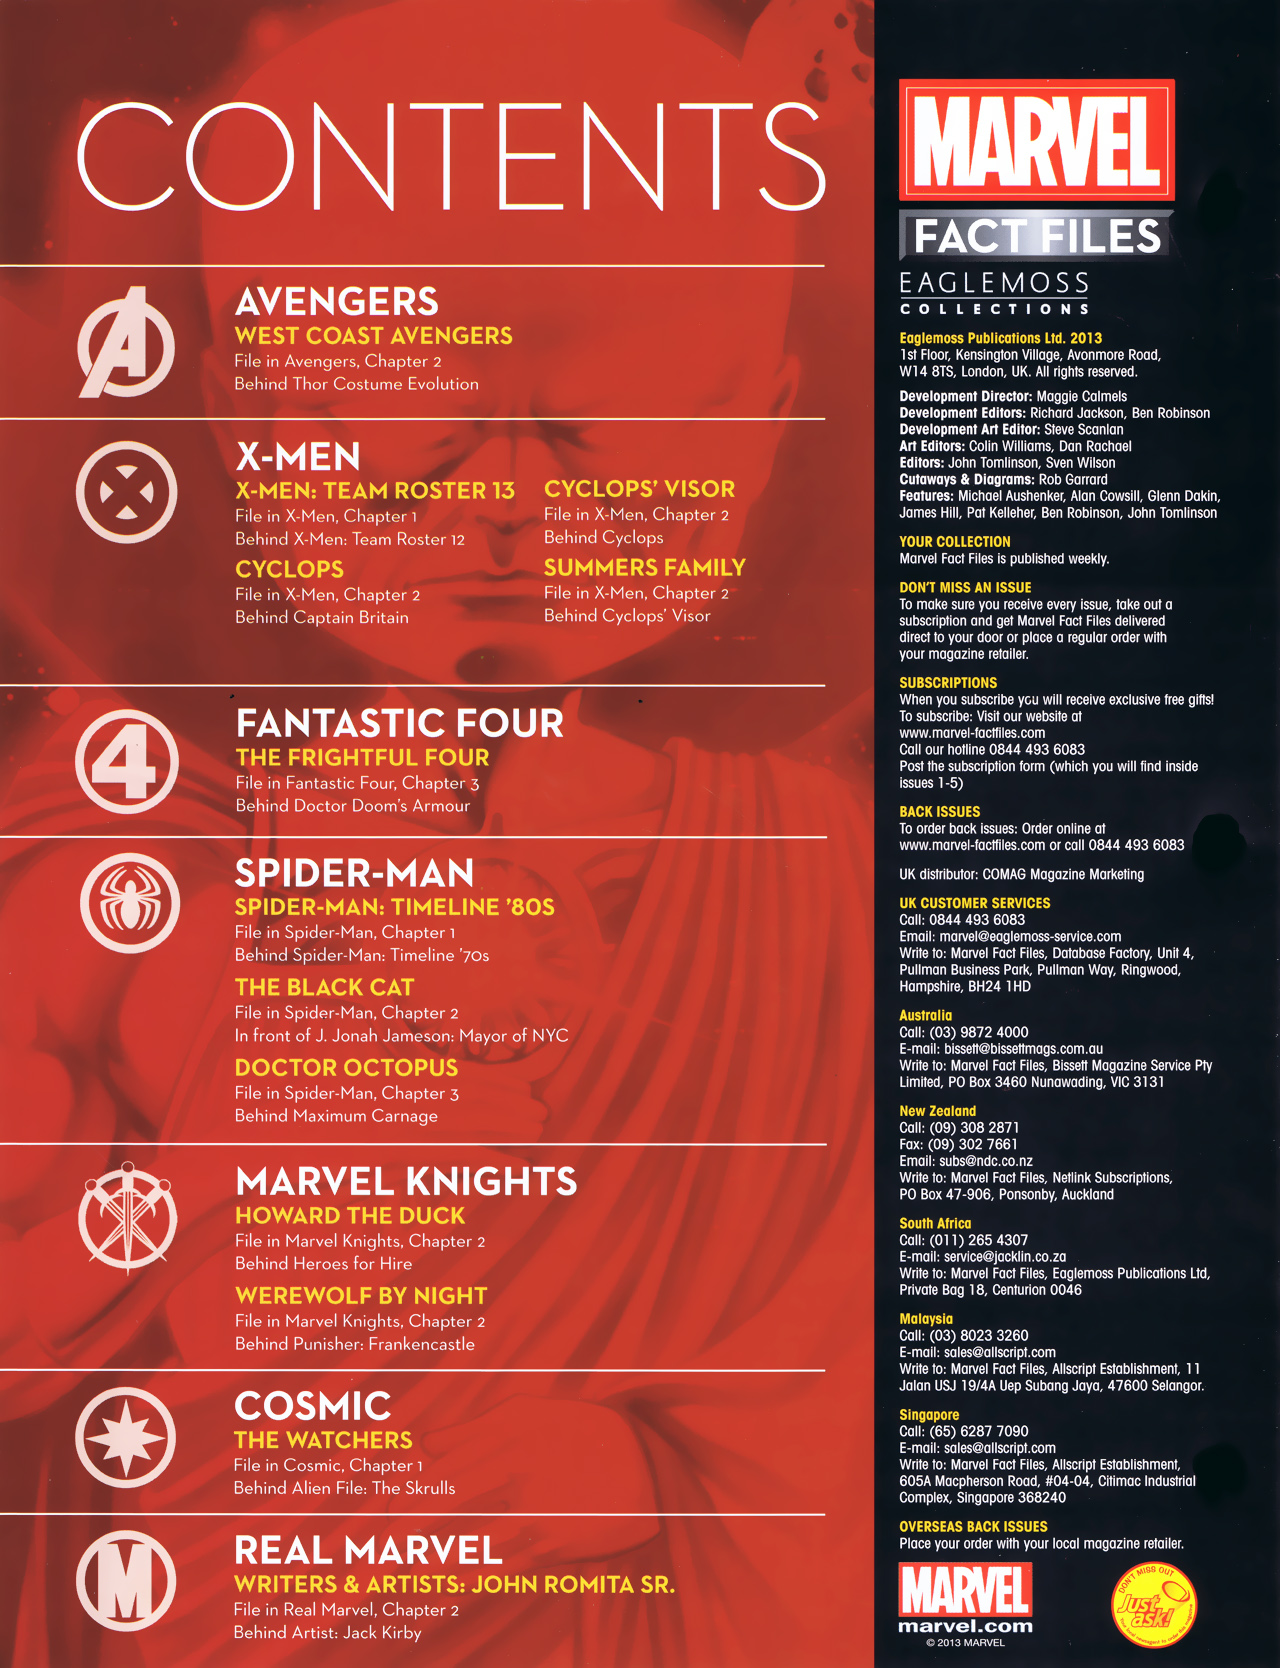 Read online Marvel Fact Files comic -  Issue #13 - 2